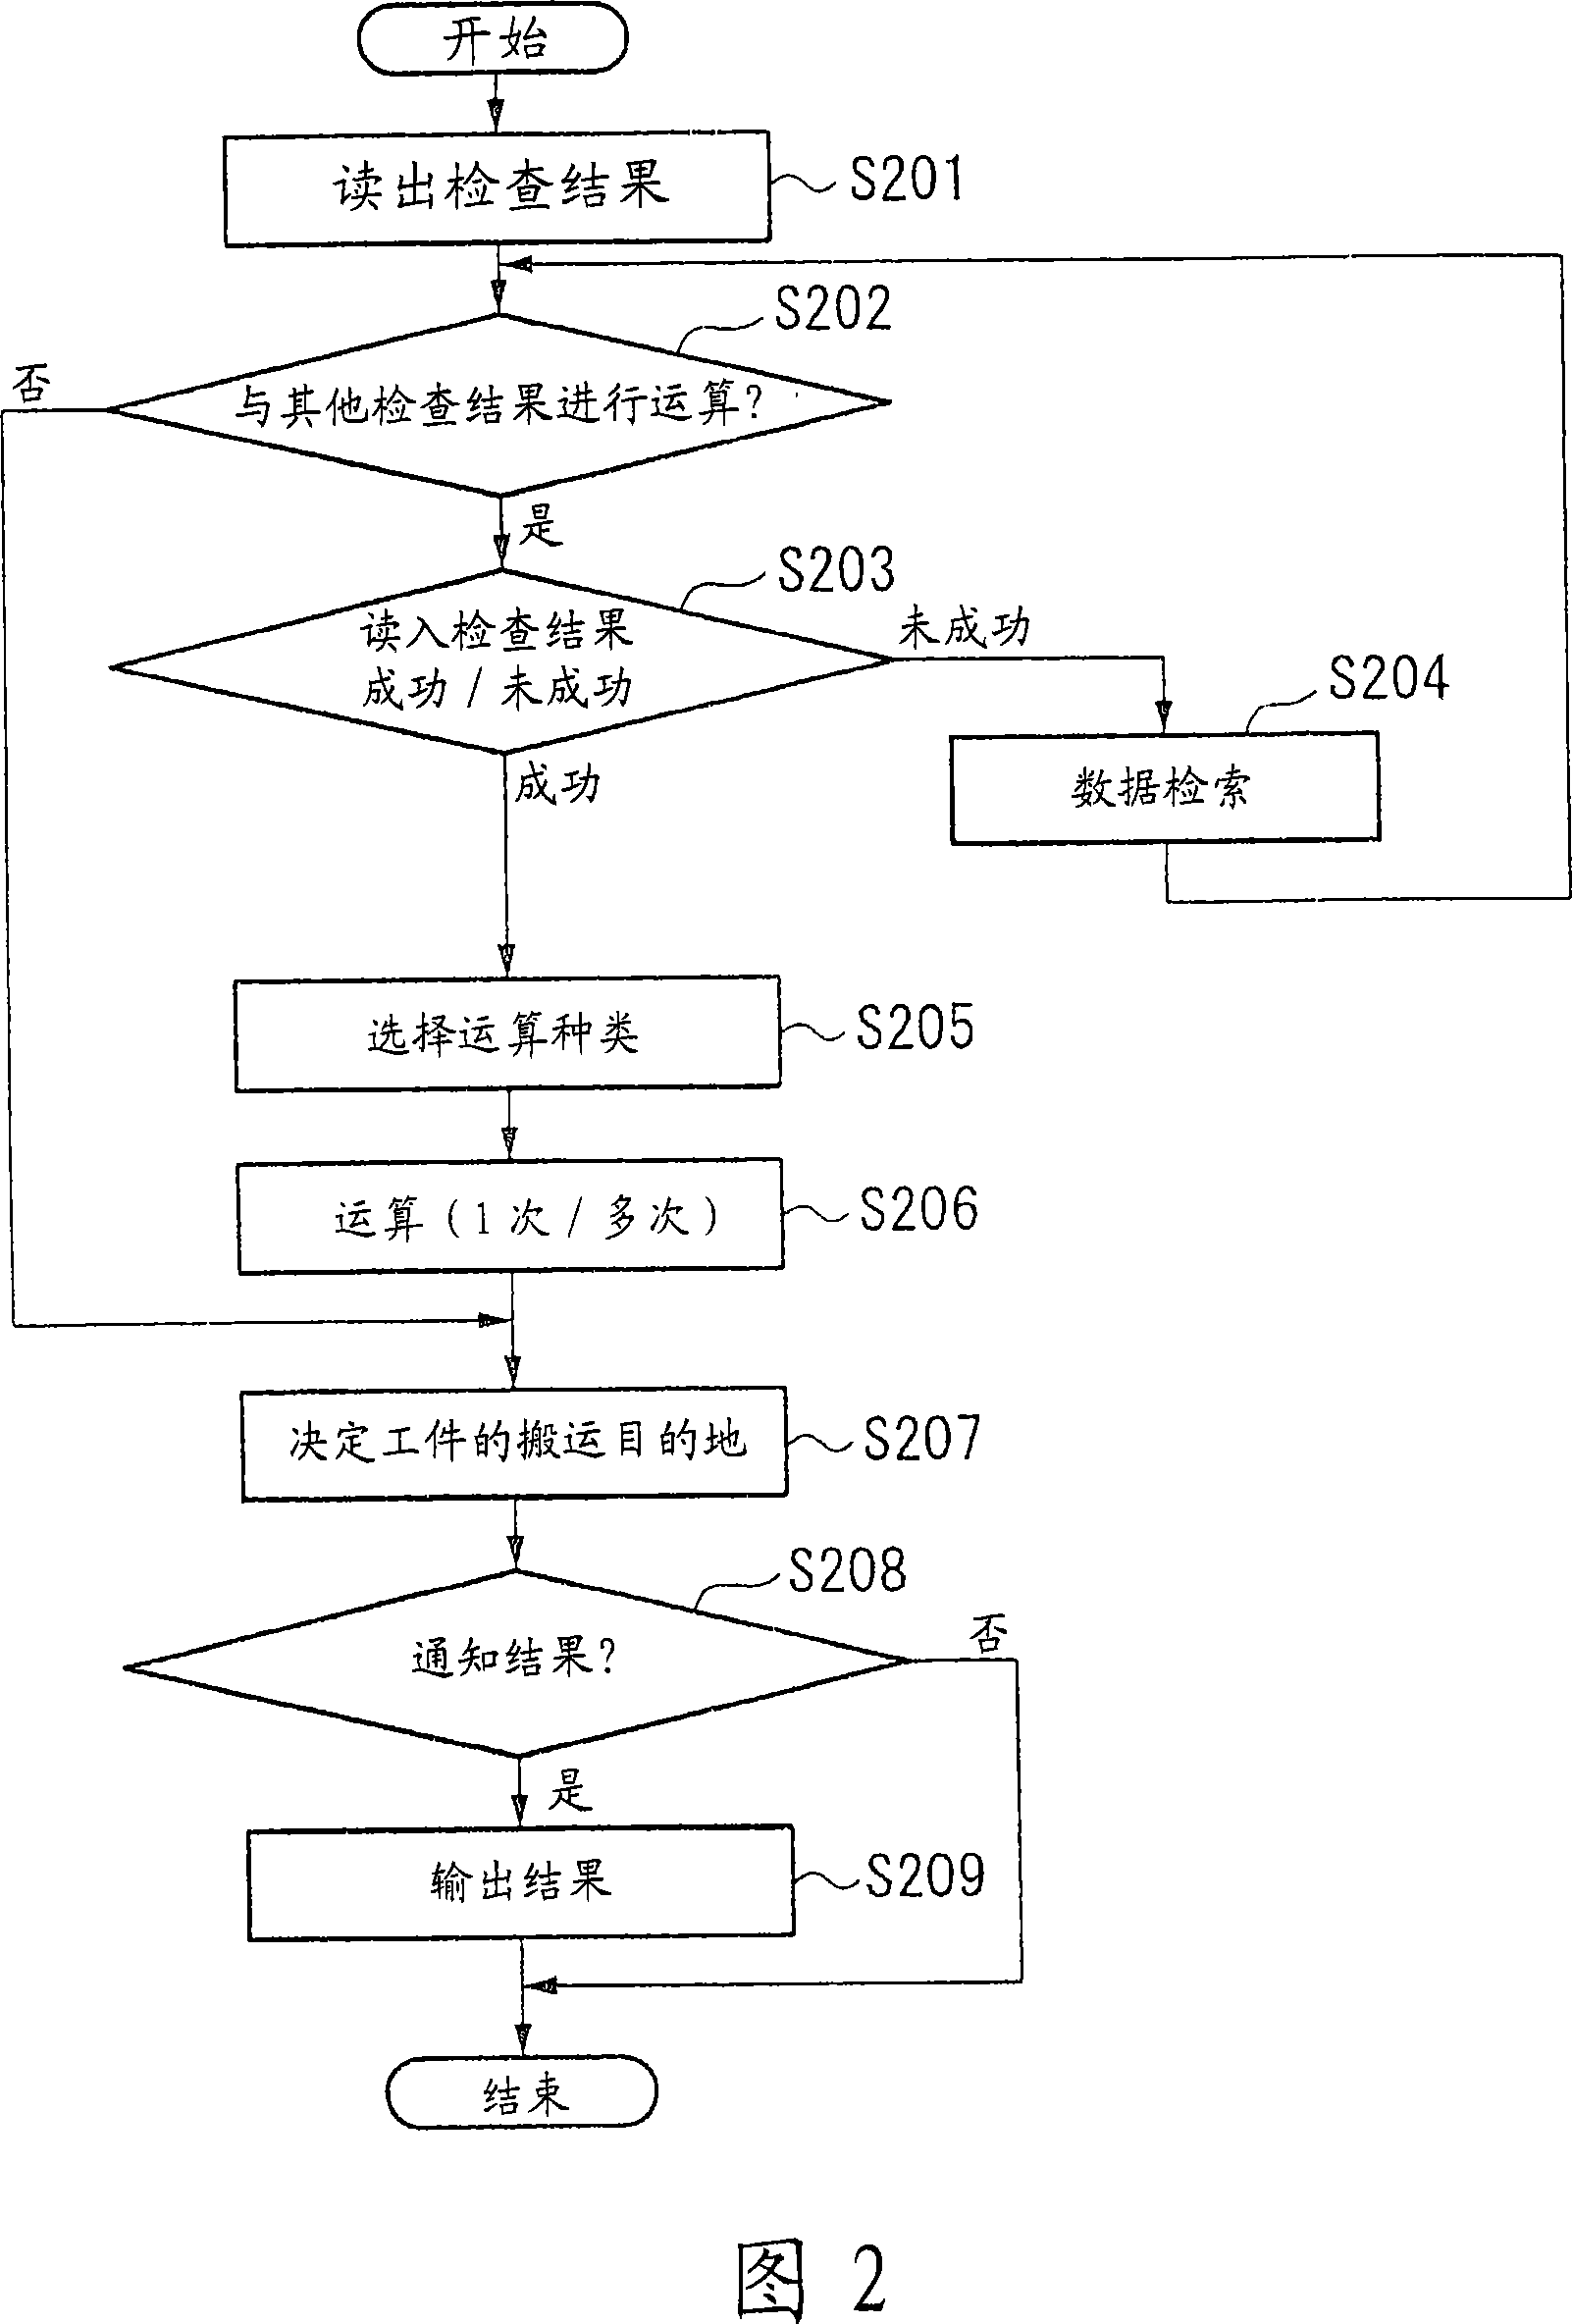 Defect detecting device and defect detecting method